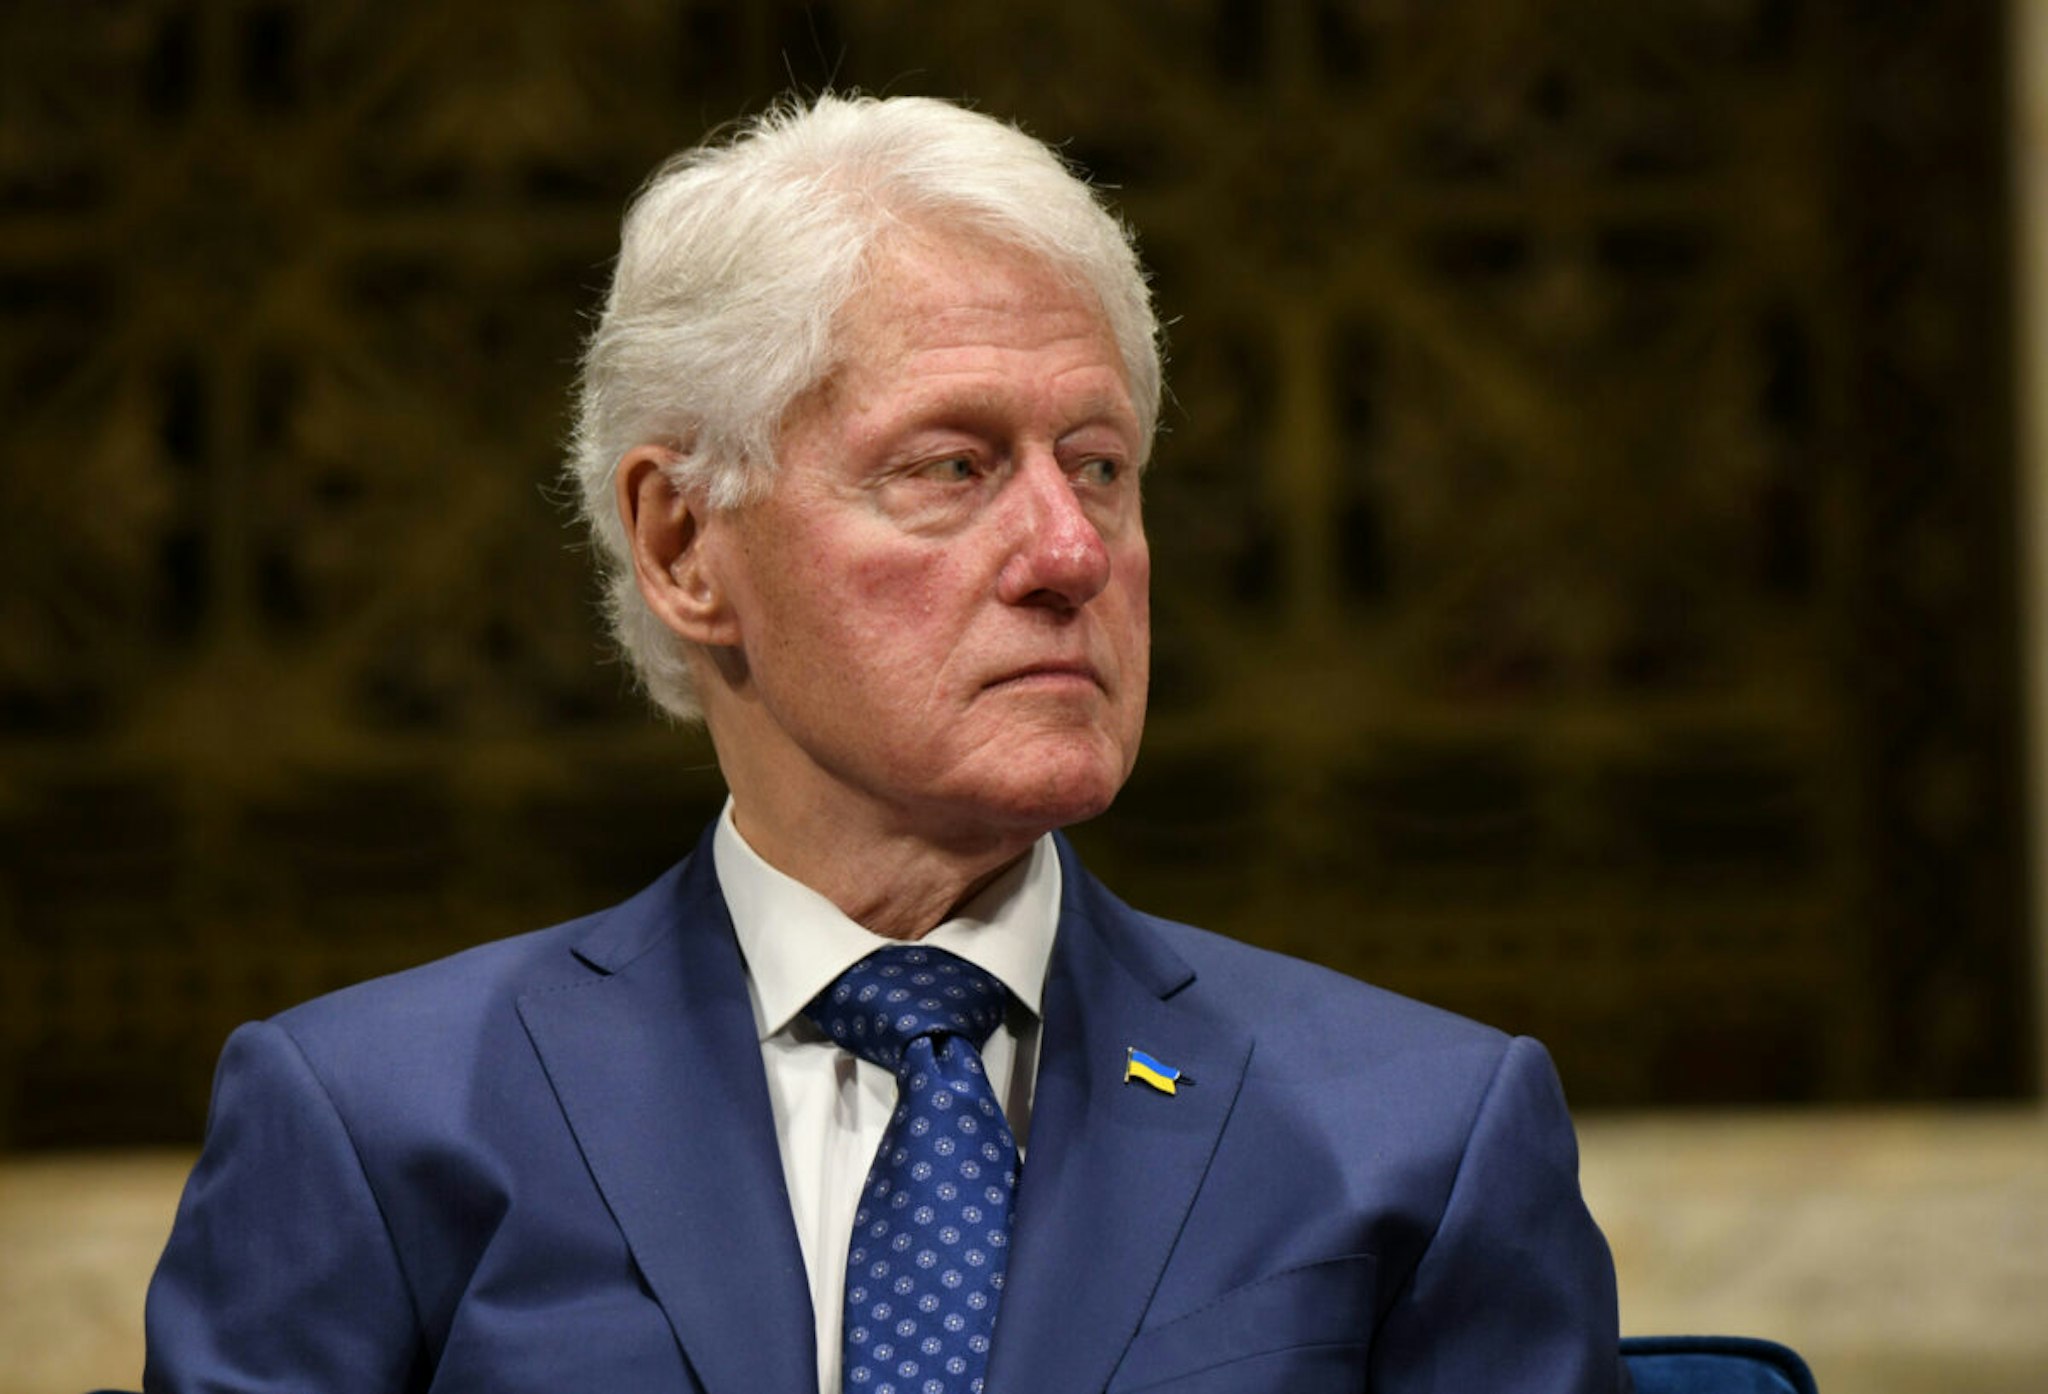 NEW YORK, NEW YORK - NOVEMBER 10: Former President Bill Clinton participates in The Temple Emanu-El Streicker Center Presents: Two Presidents, One Extraordinary Evening at Temple Emanu-El on November 10, 2022 in New York City.